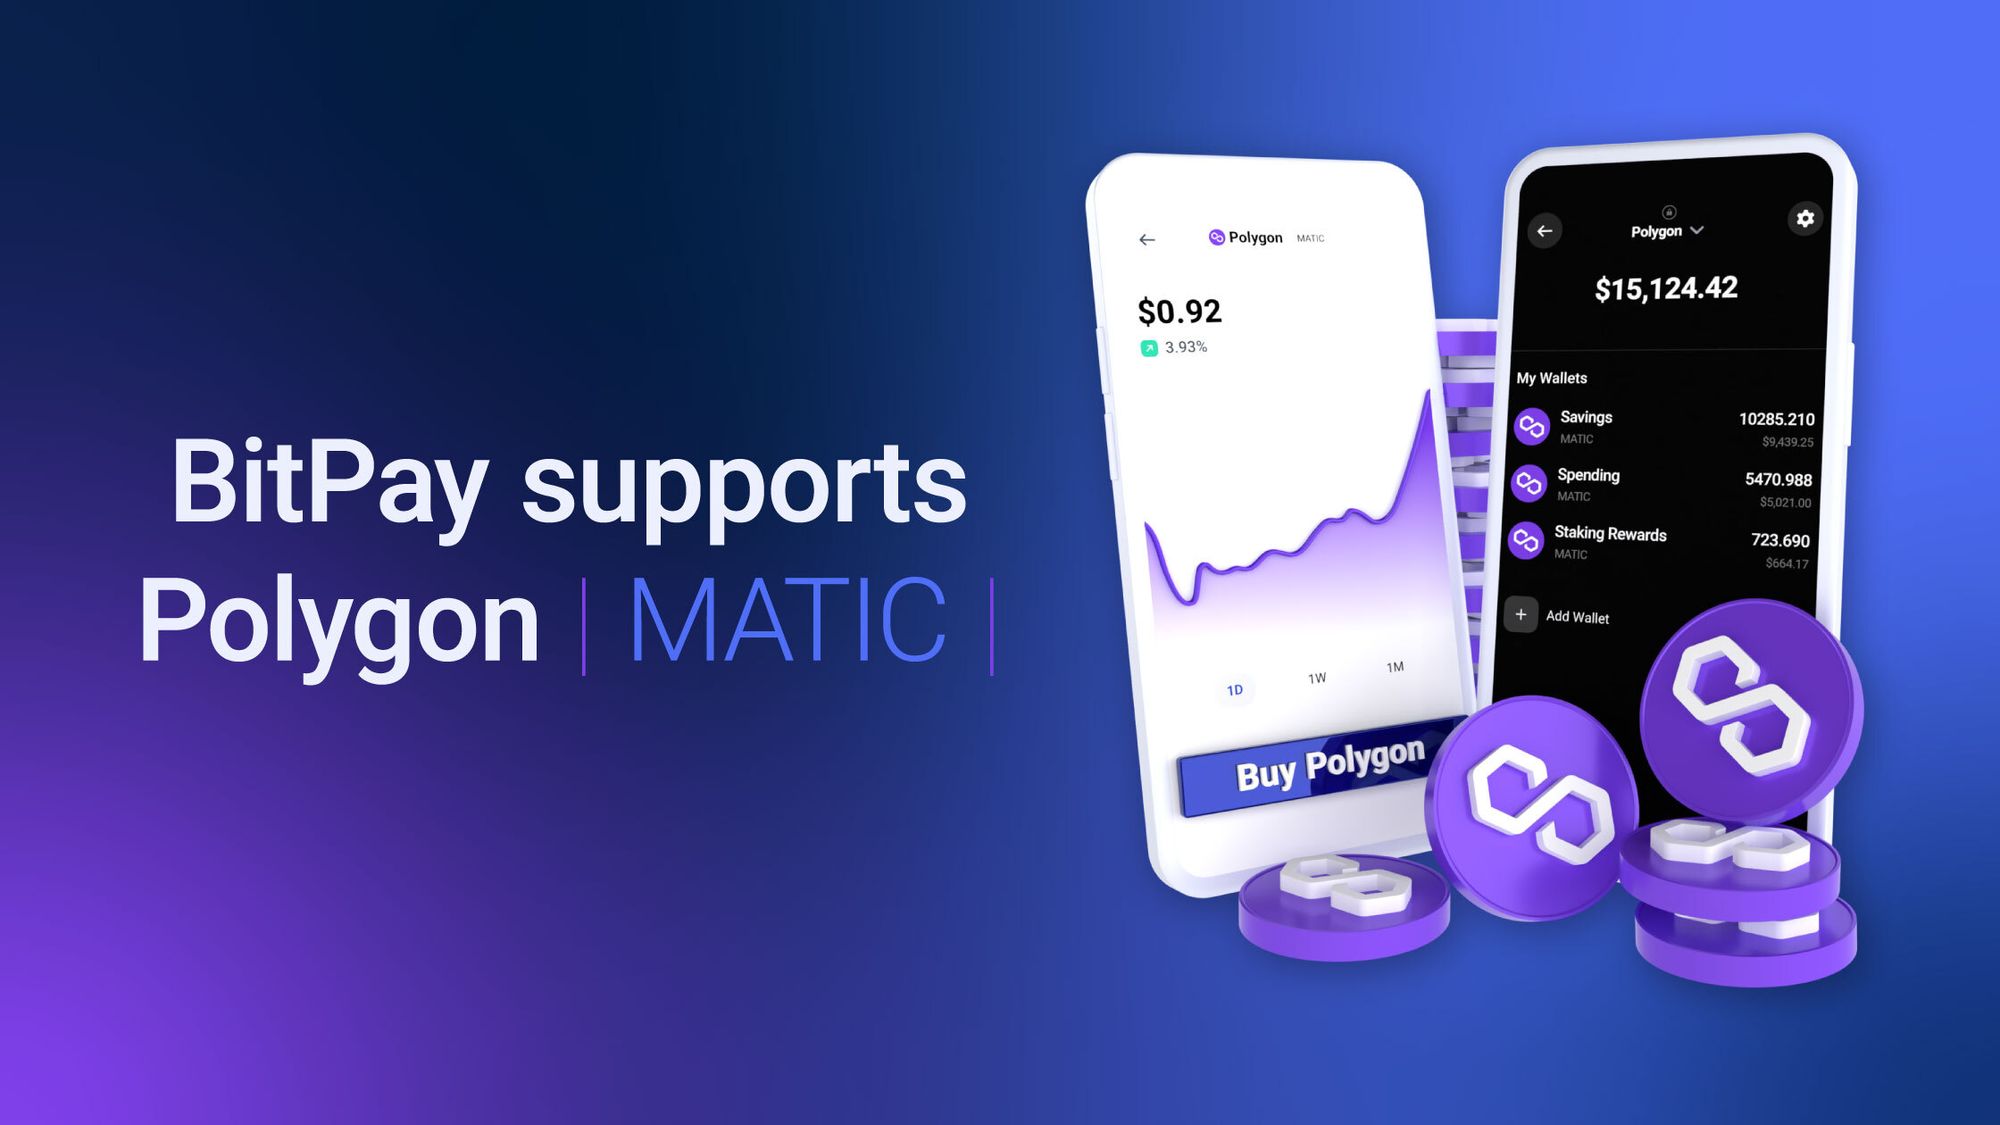 BitPay Supports Polygon: Buy, Store, Swap and Spend Polygon (MATIC)